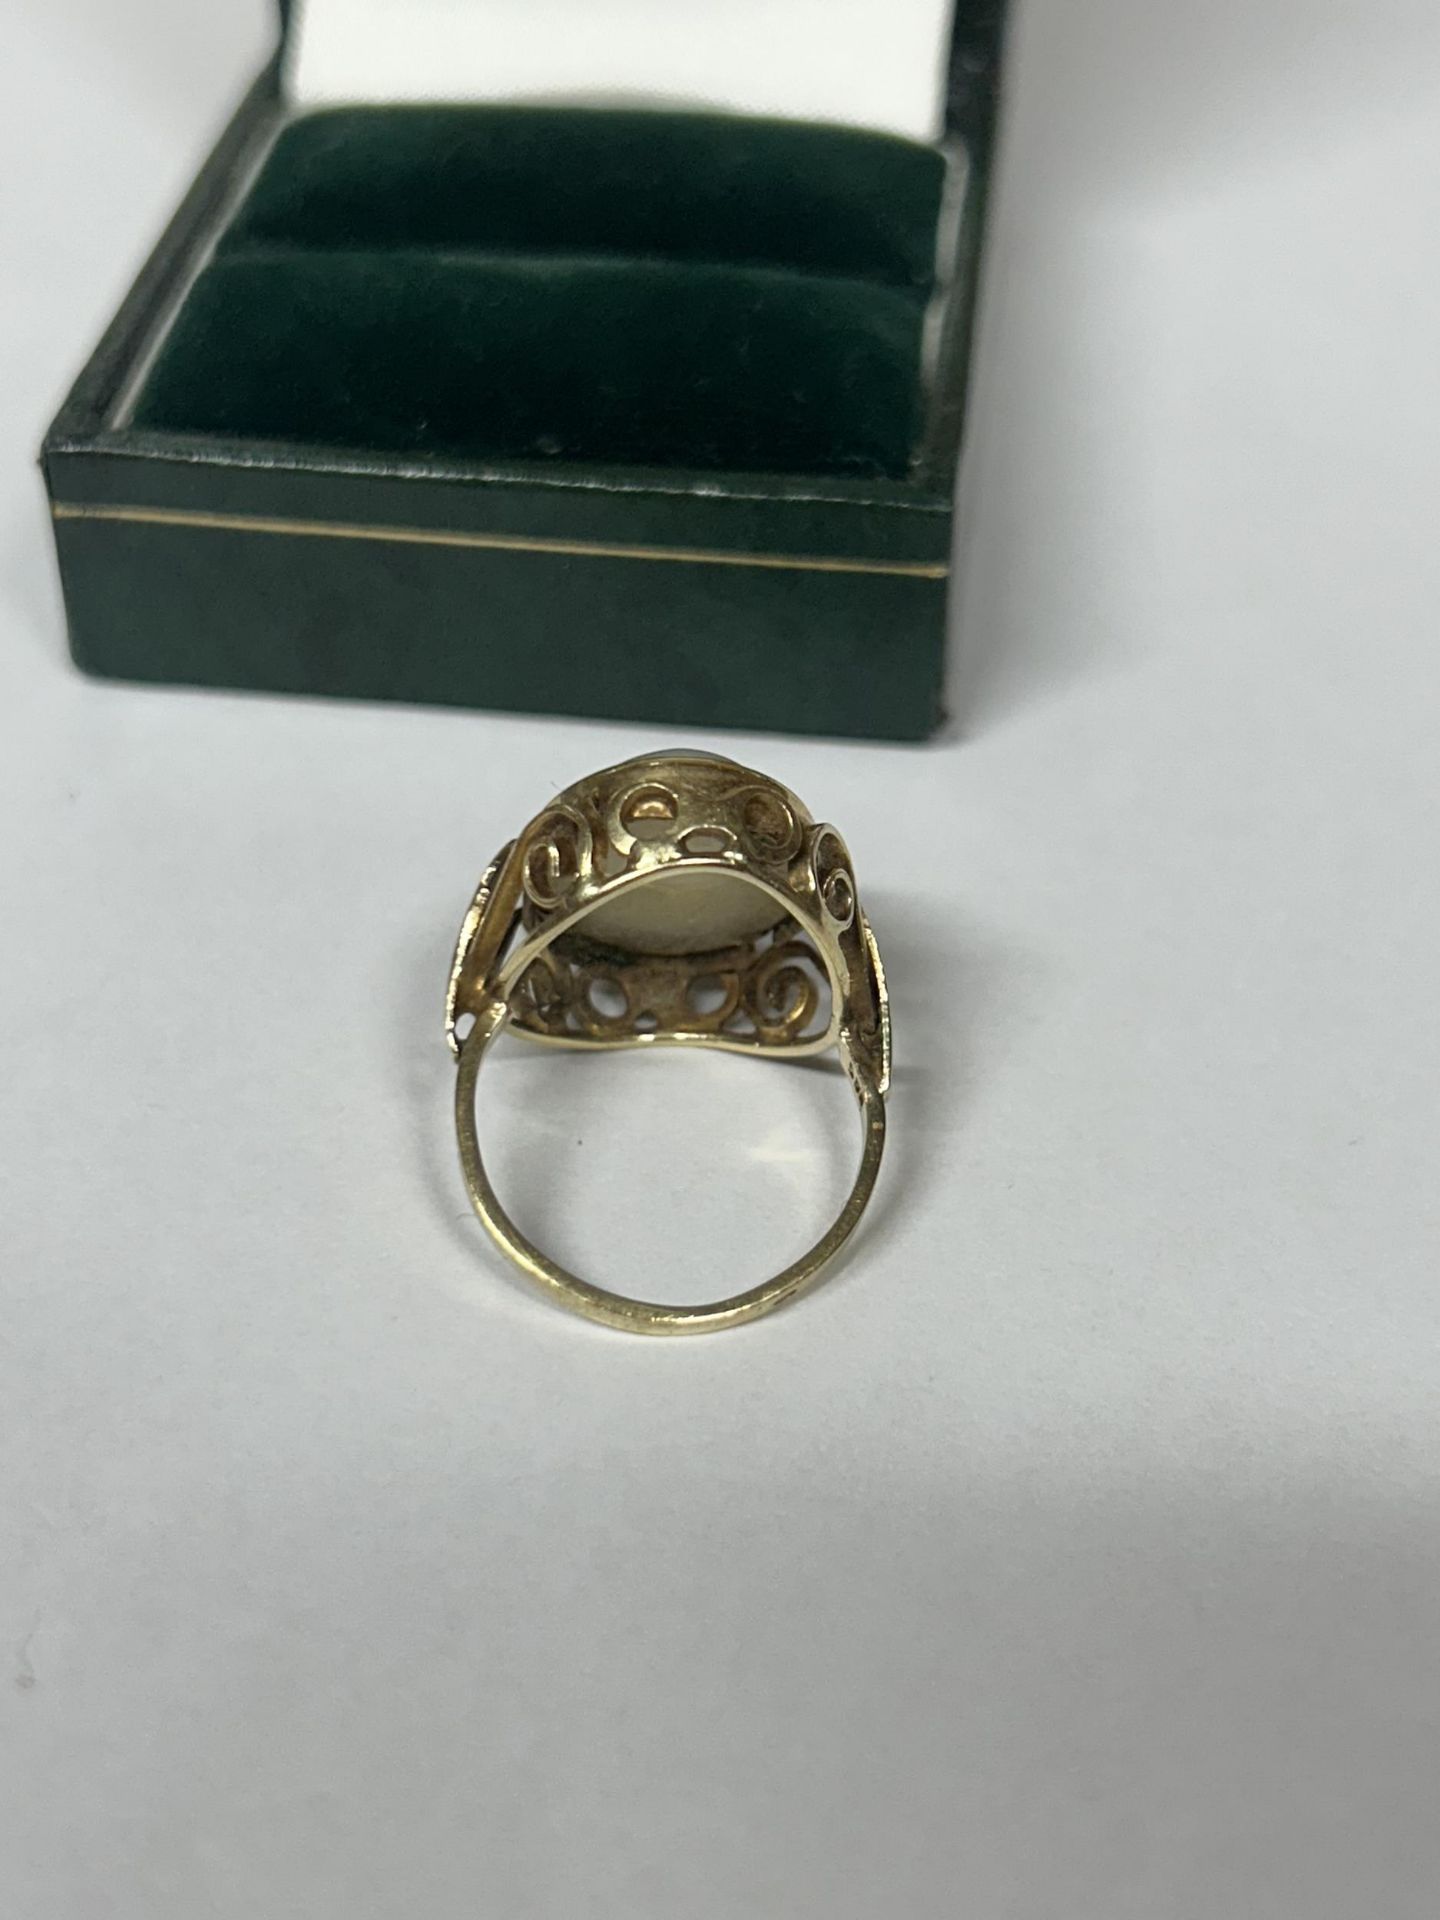 A 14CT YELLOW GOLD WHITE QUARTZ CABOCHON RING, SIZE L, WEIGHT 5.07 GRAMS - Image 3 of 5